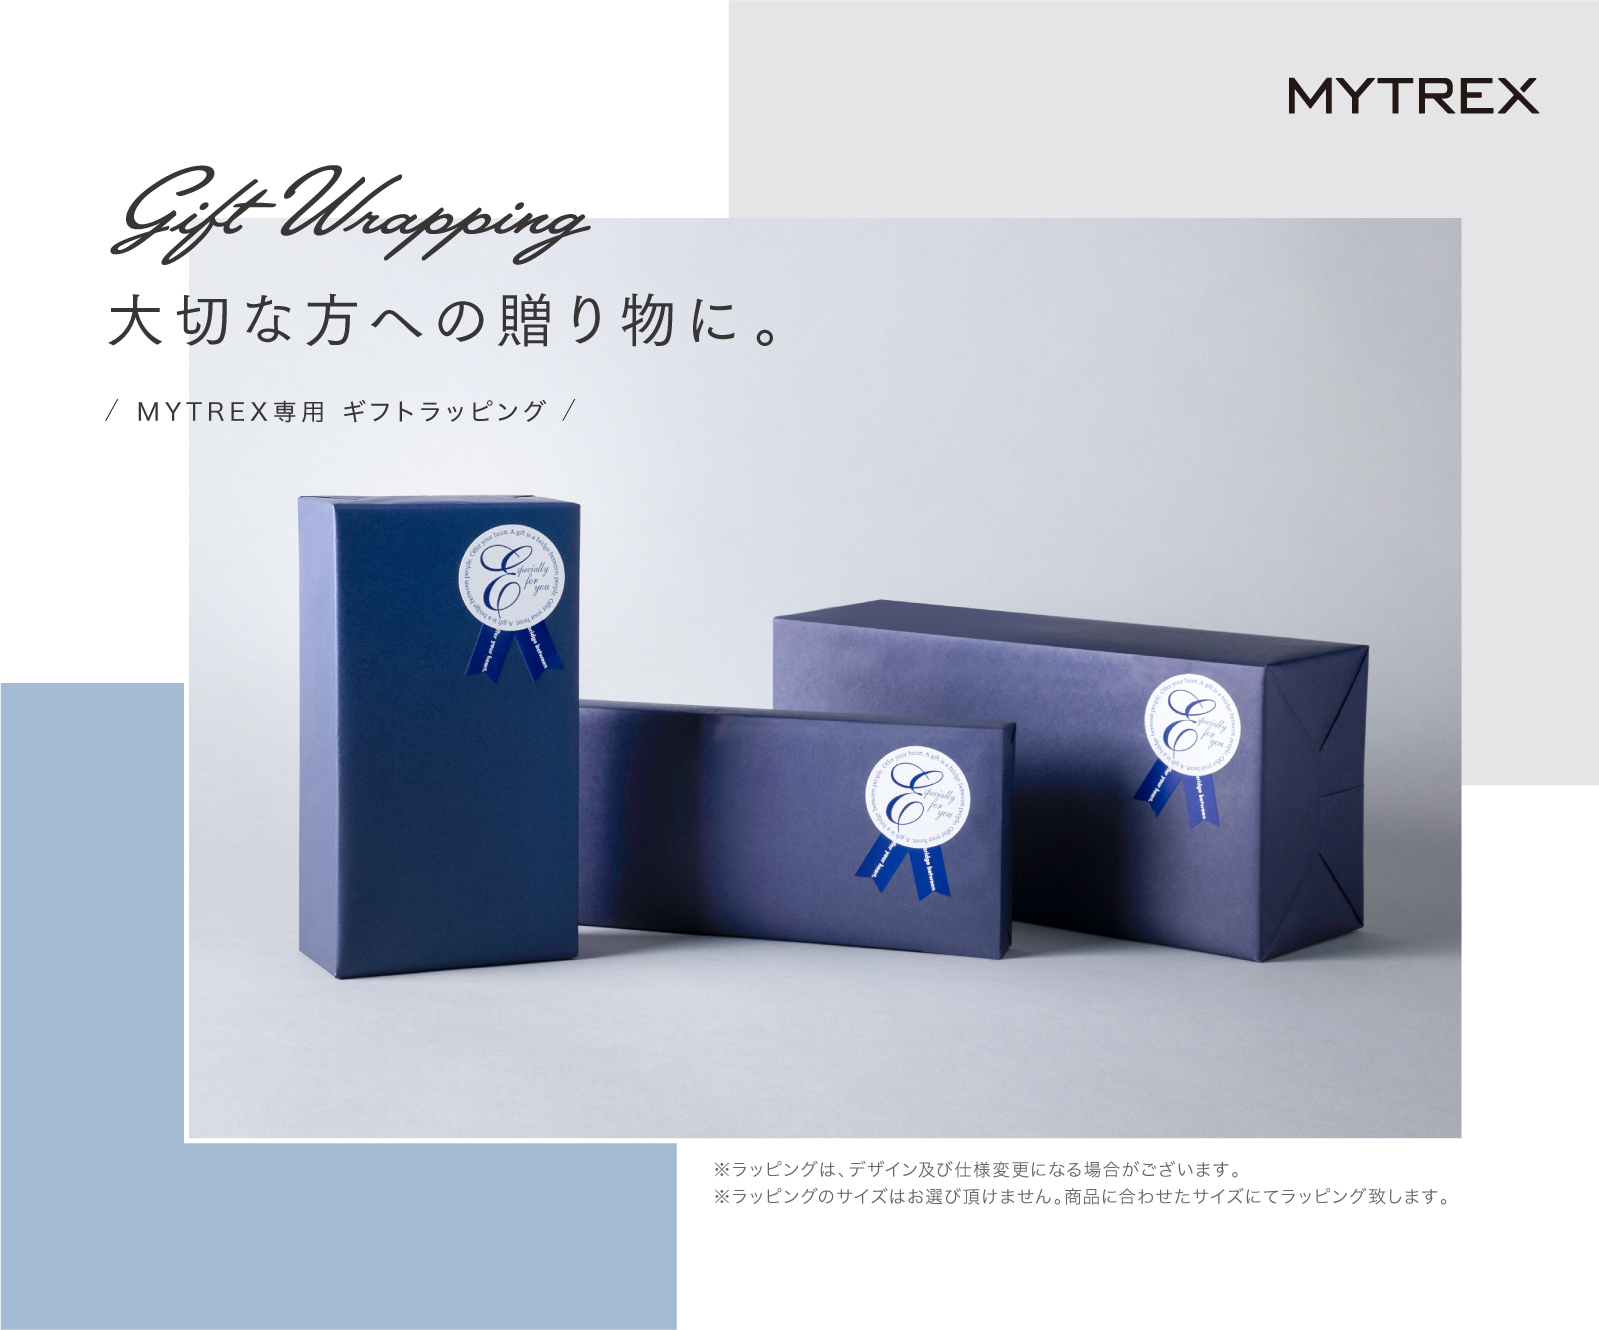 Gift Wrapping – MYTREX専用ギフトラッピング（包装紙） — MYTREX 